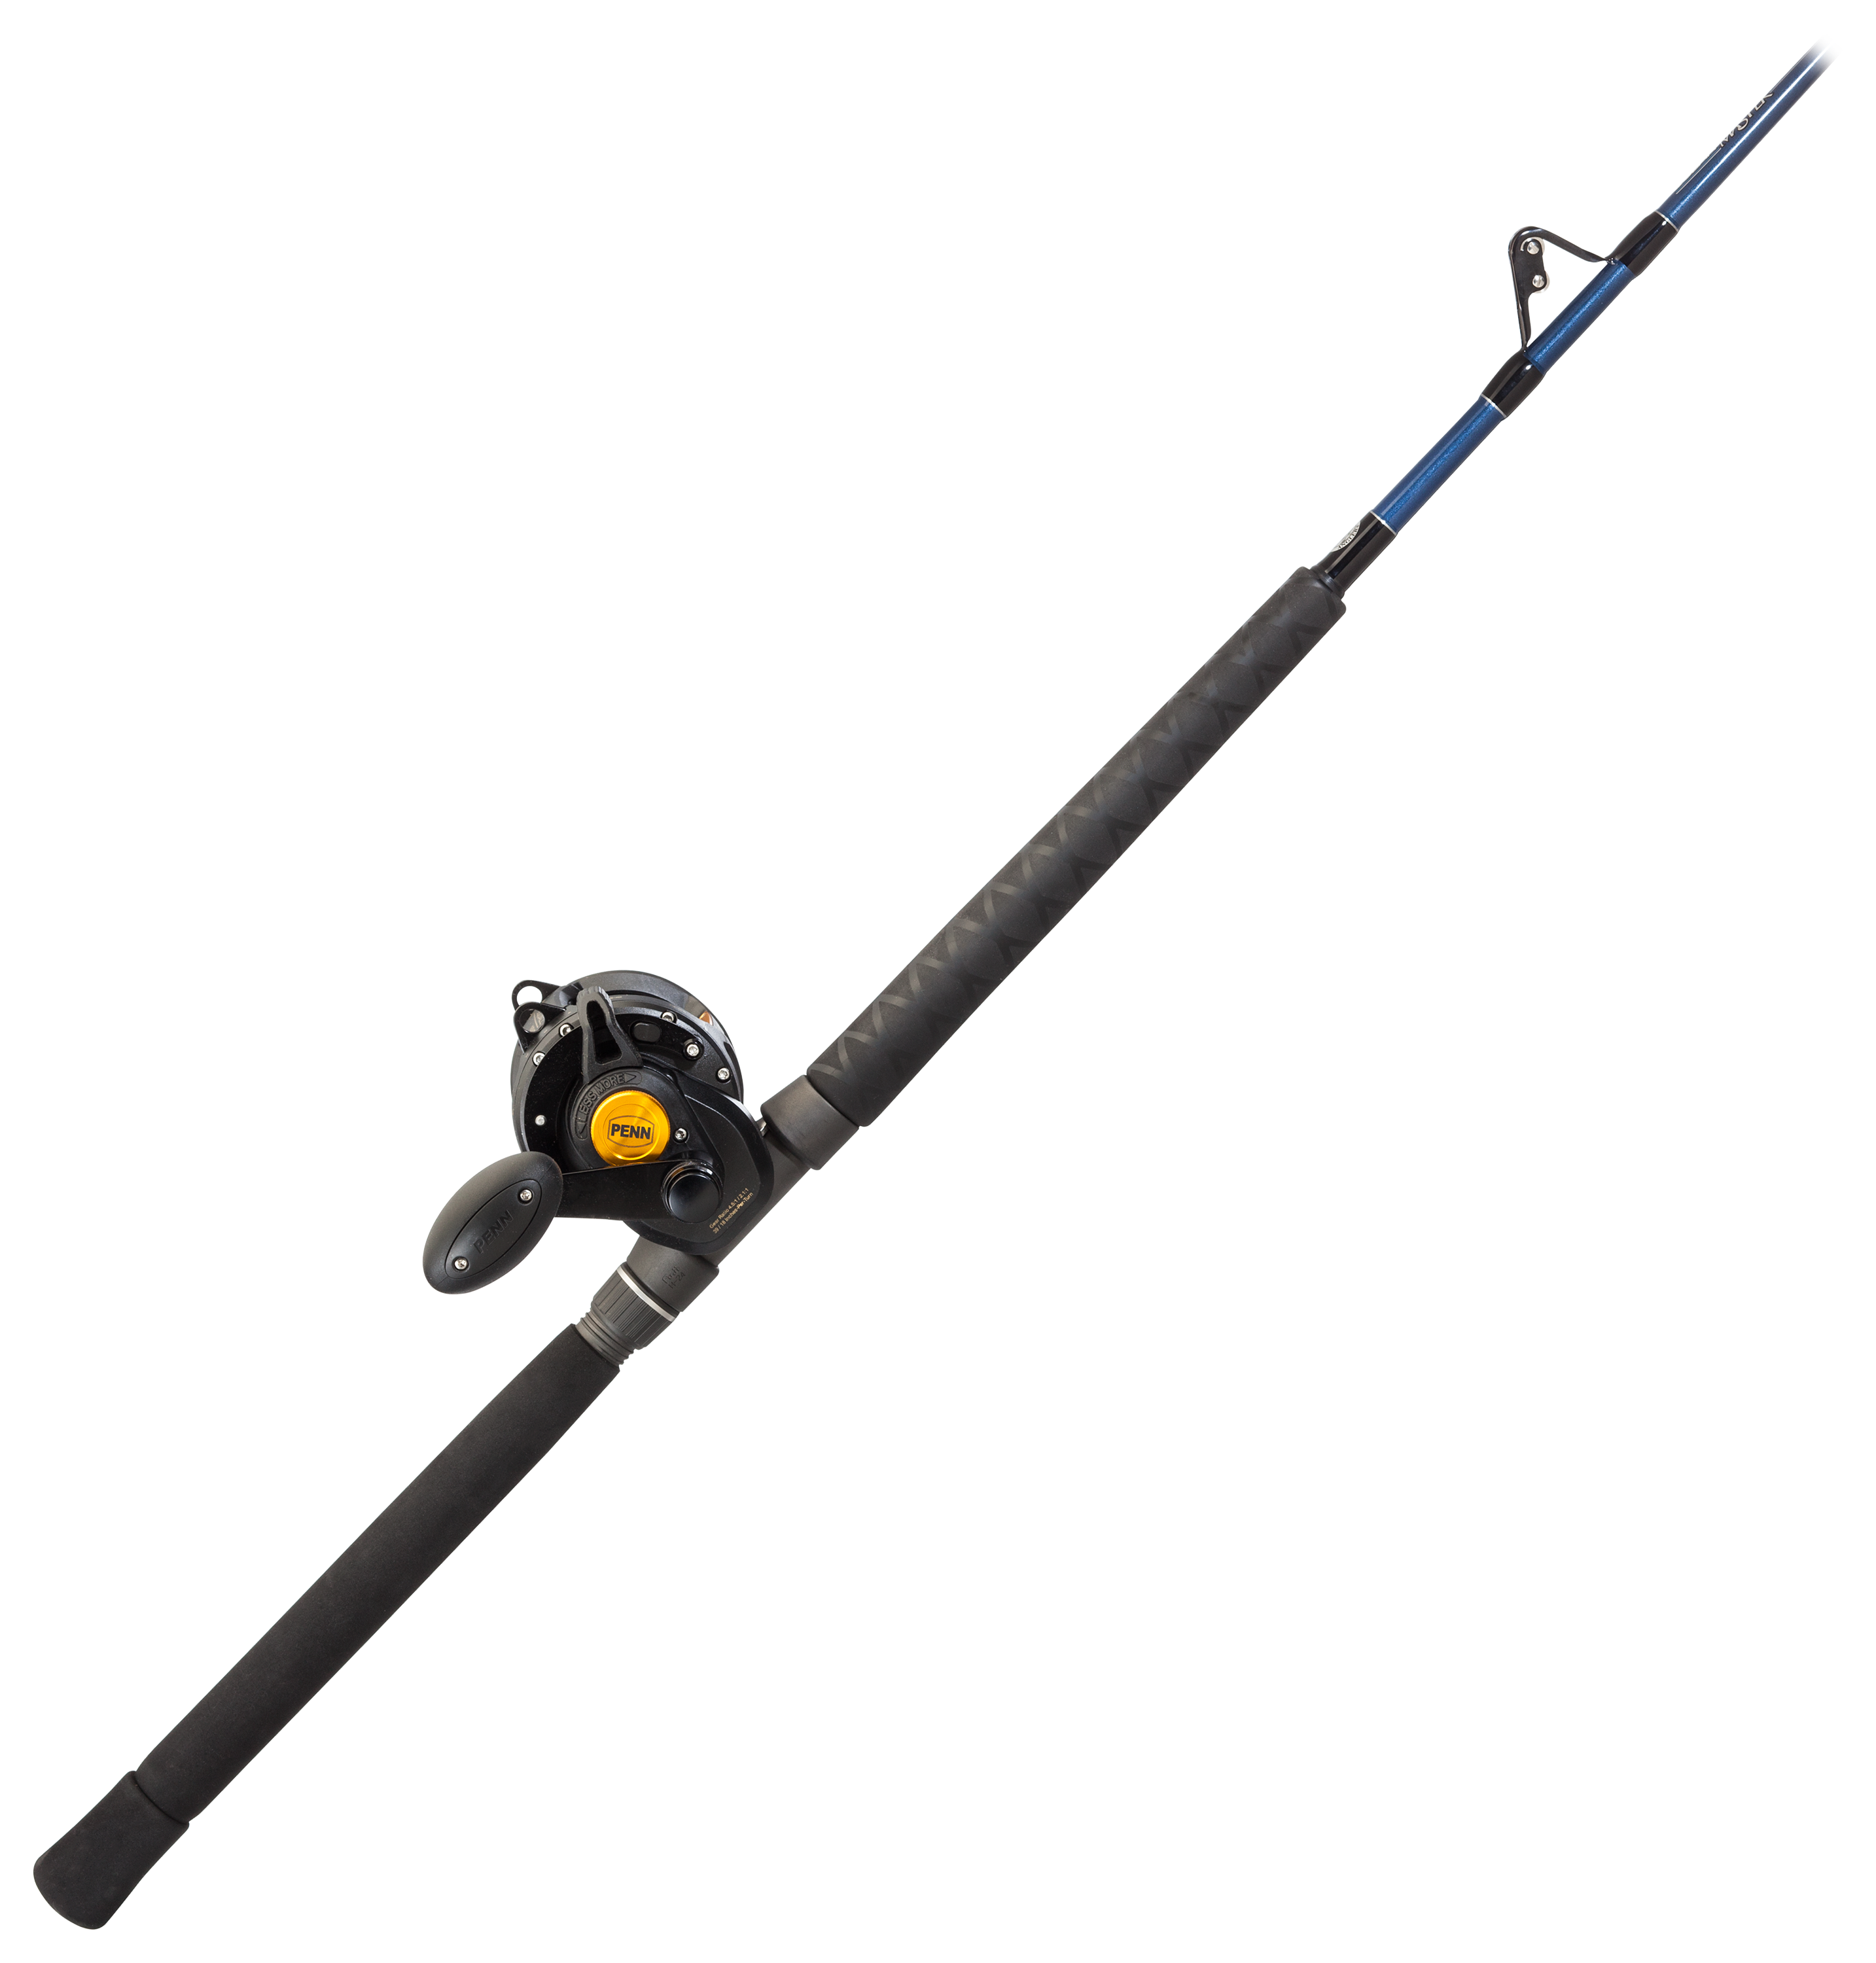 PENN Squall Two-speed Lever Drag Offshore Angler Ocean Master OMSU Stand-Up Rod and Reel Combo - SQL50VSM OMSU-2C